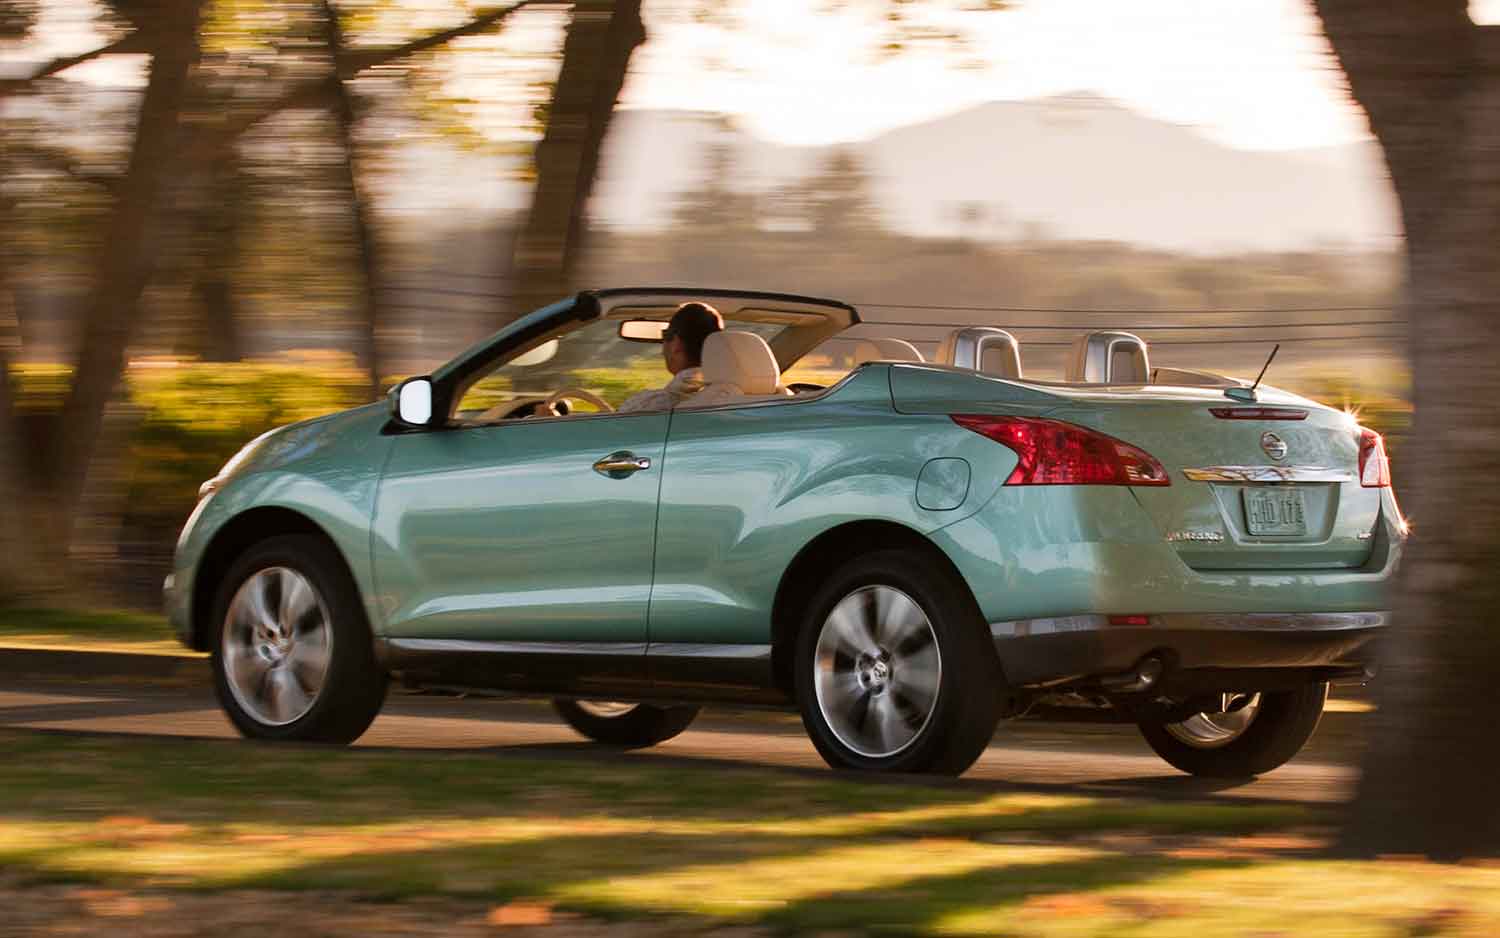 Nissan Compares Murano CrossCabriolet with Z4, Corvette - Would You?